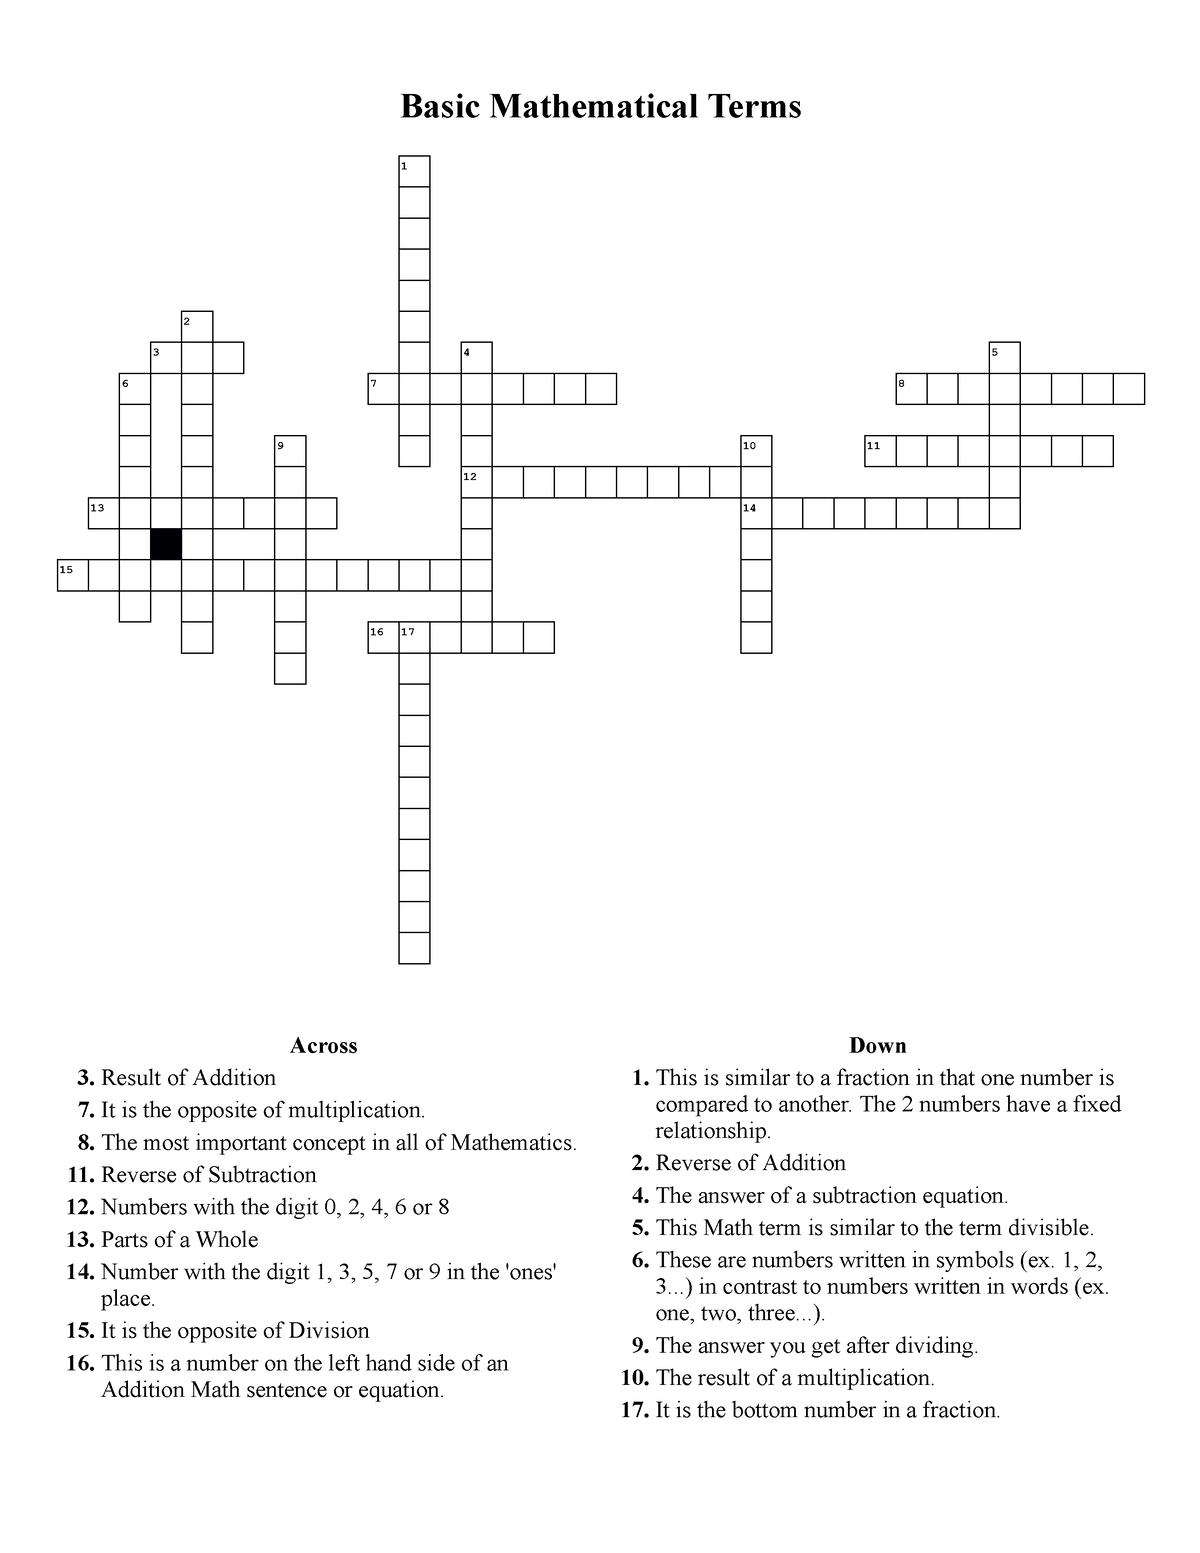 Math Crossword Puzzle Basic Mathematical Terms 1 2 3 4 5 6 7 8 9 10